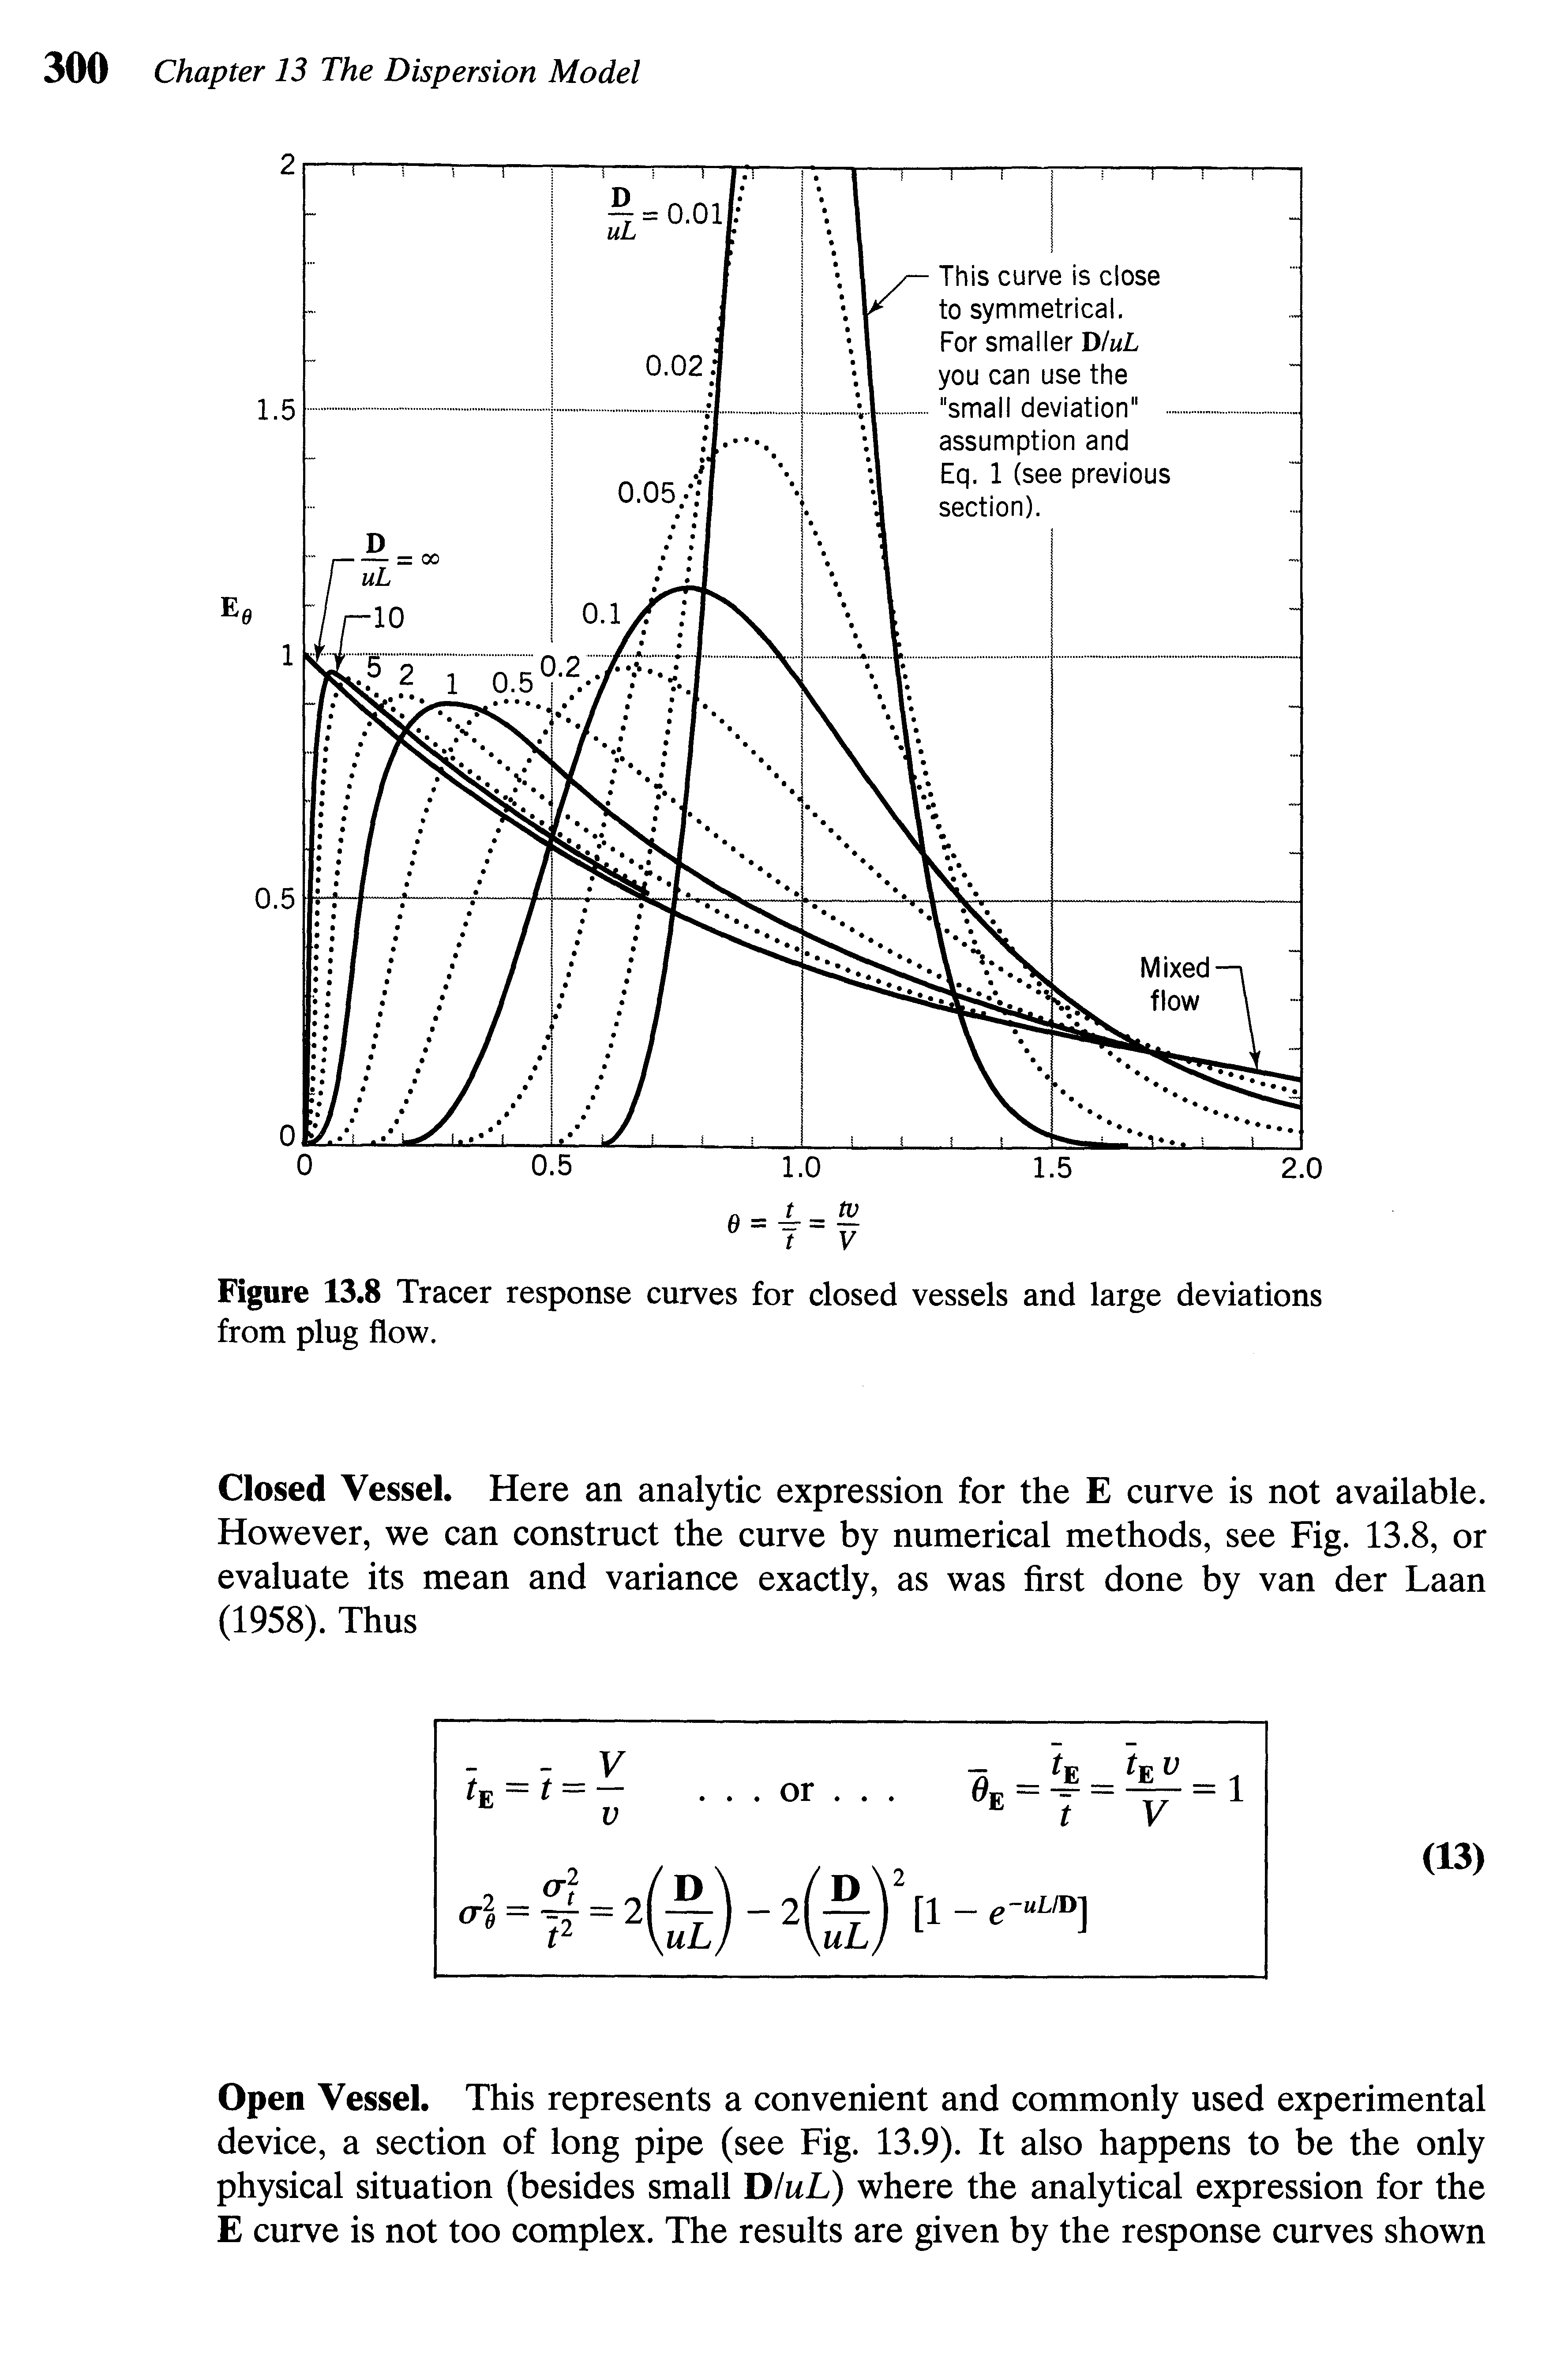 Figure 13.8 Tracer response curves for closed vessels and large deviations from plug flow.